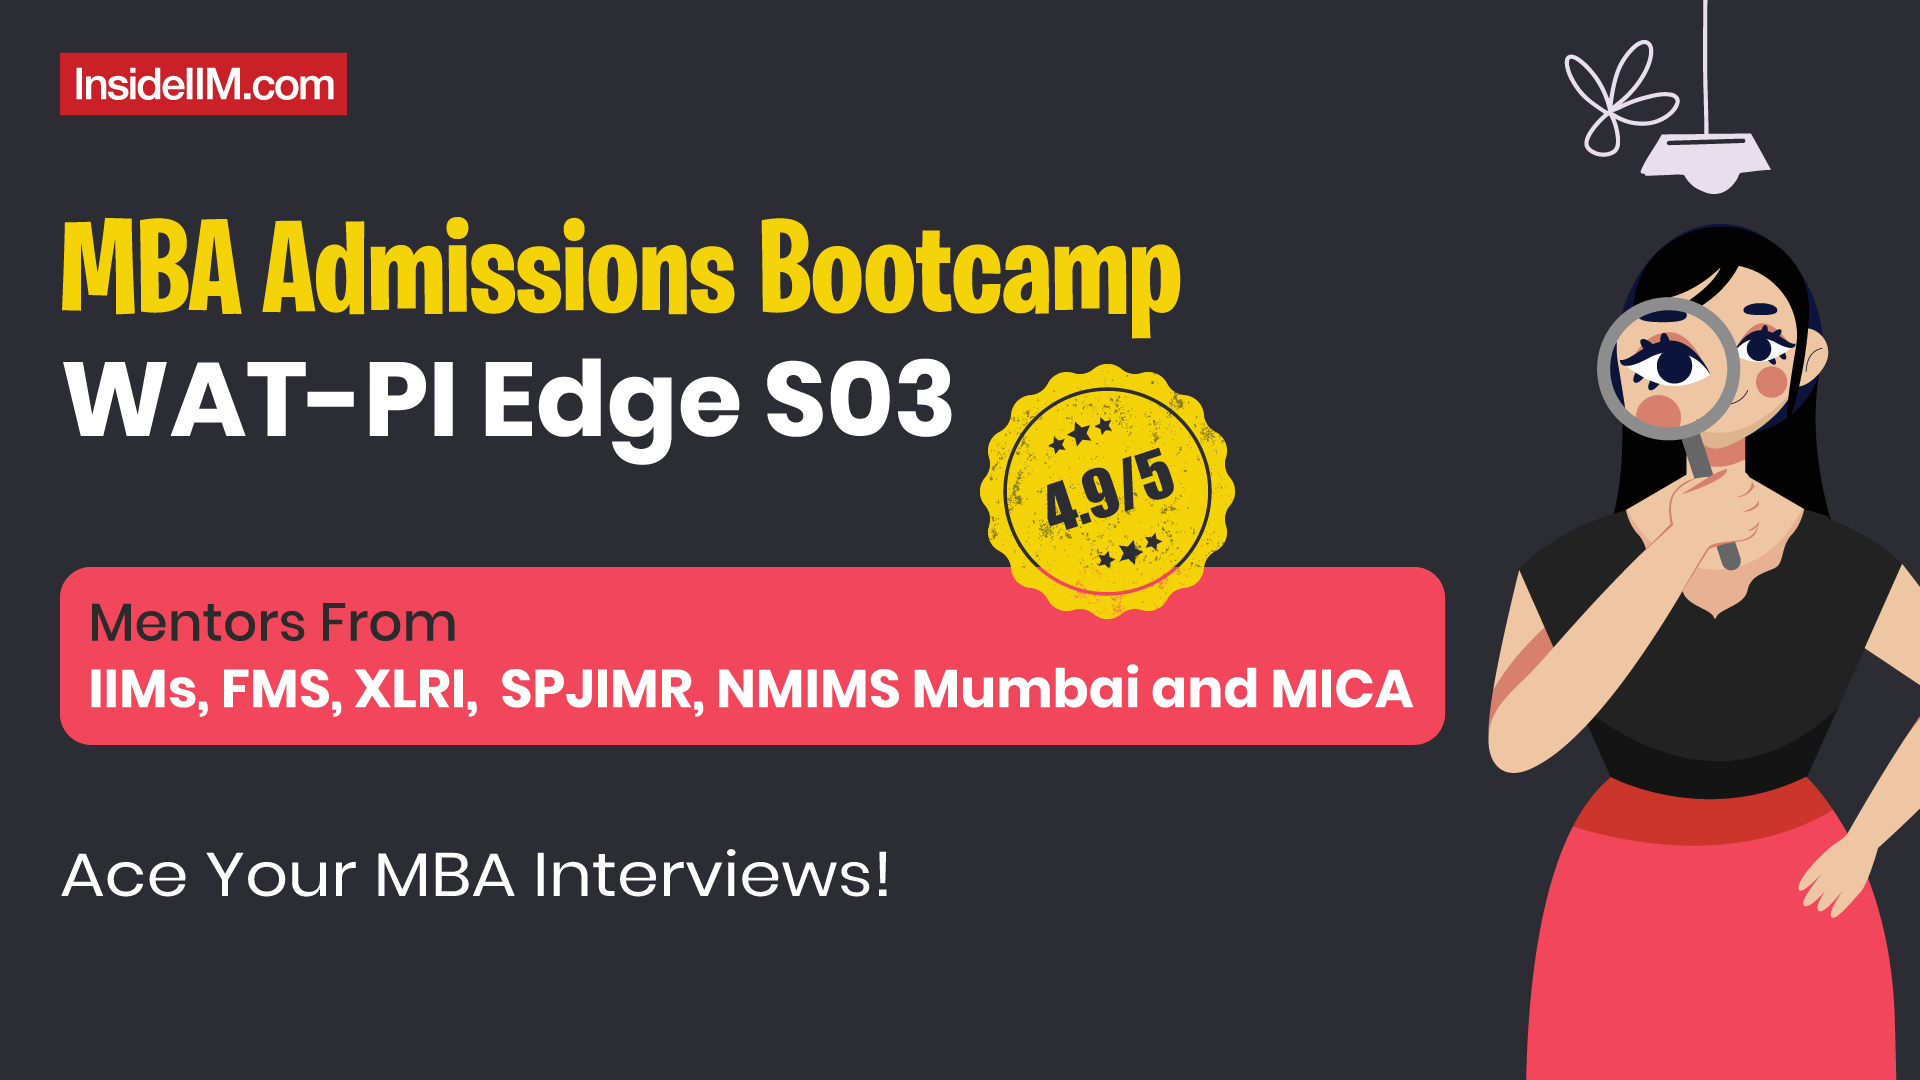 Ace Your MBA Interviews With MBA Admissions Bootcamp - WAT-PI Edge S03!